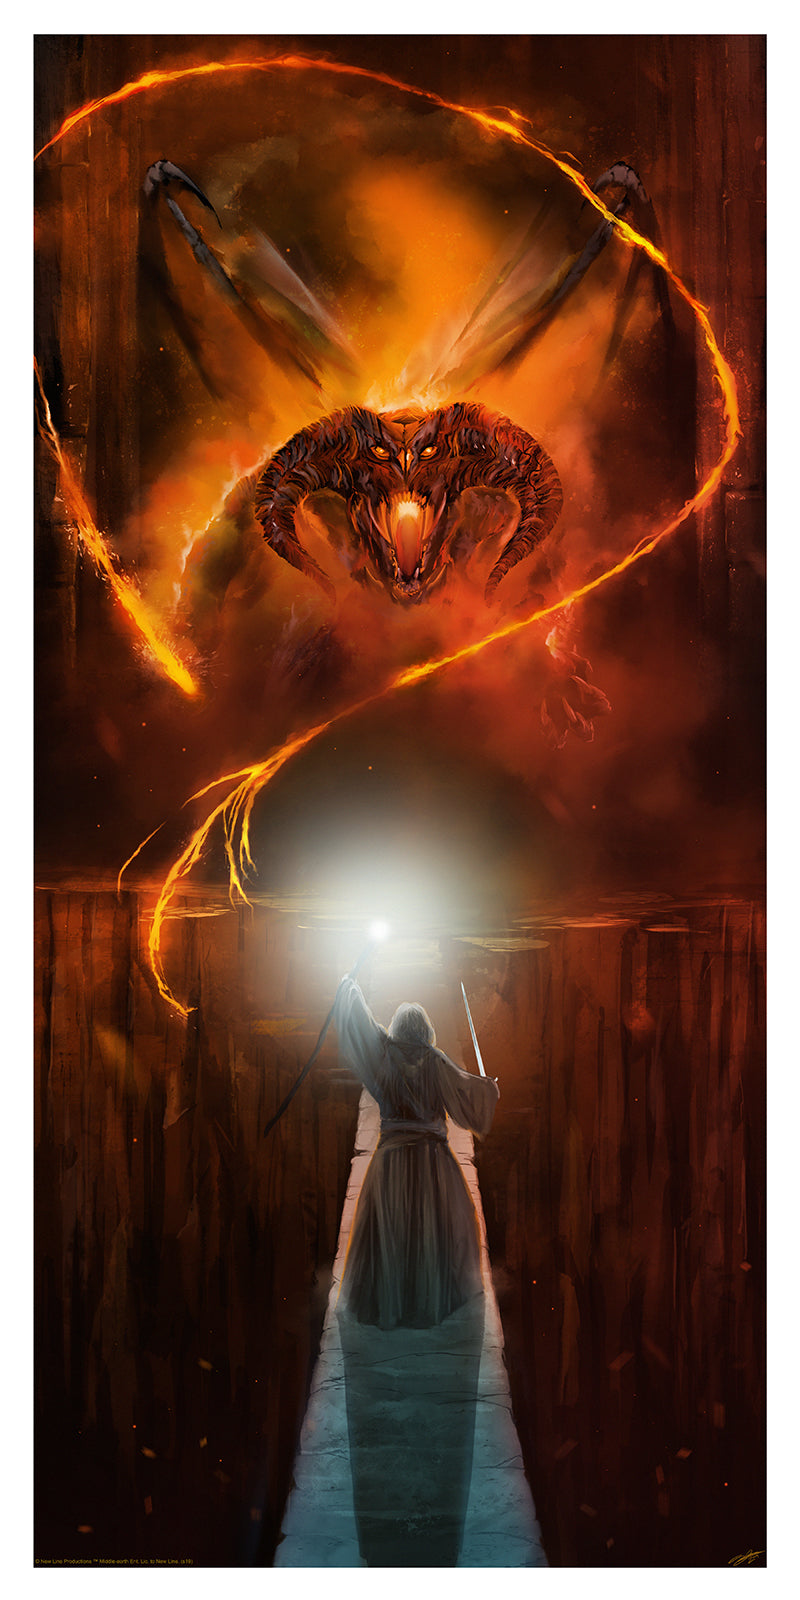 Andy Fairhurst "The Lord of the Rings - Gandalf"